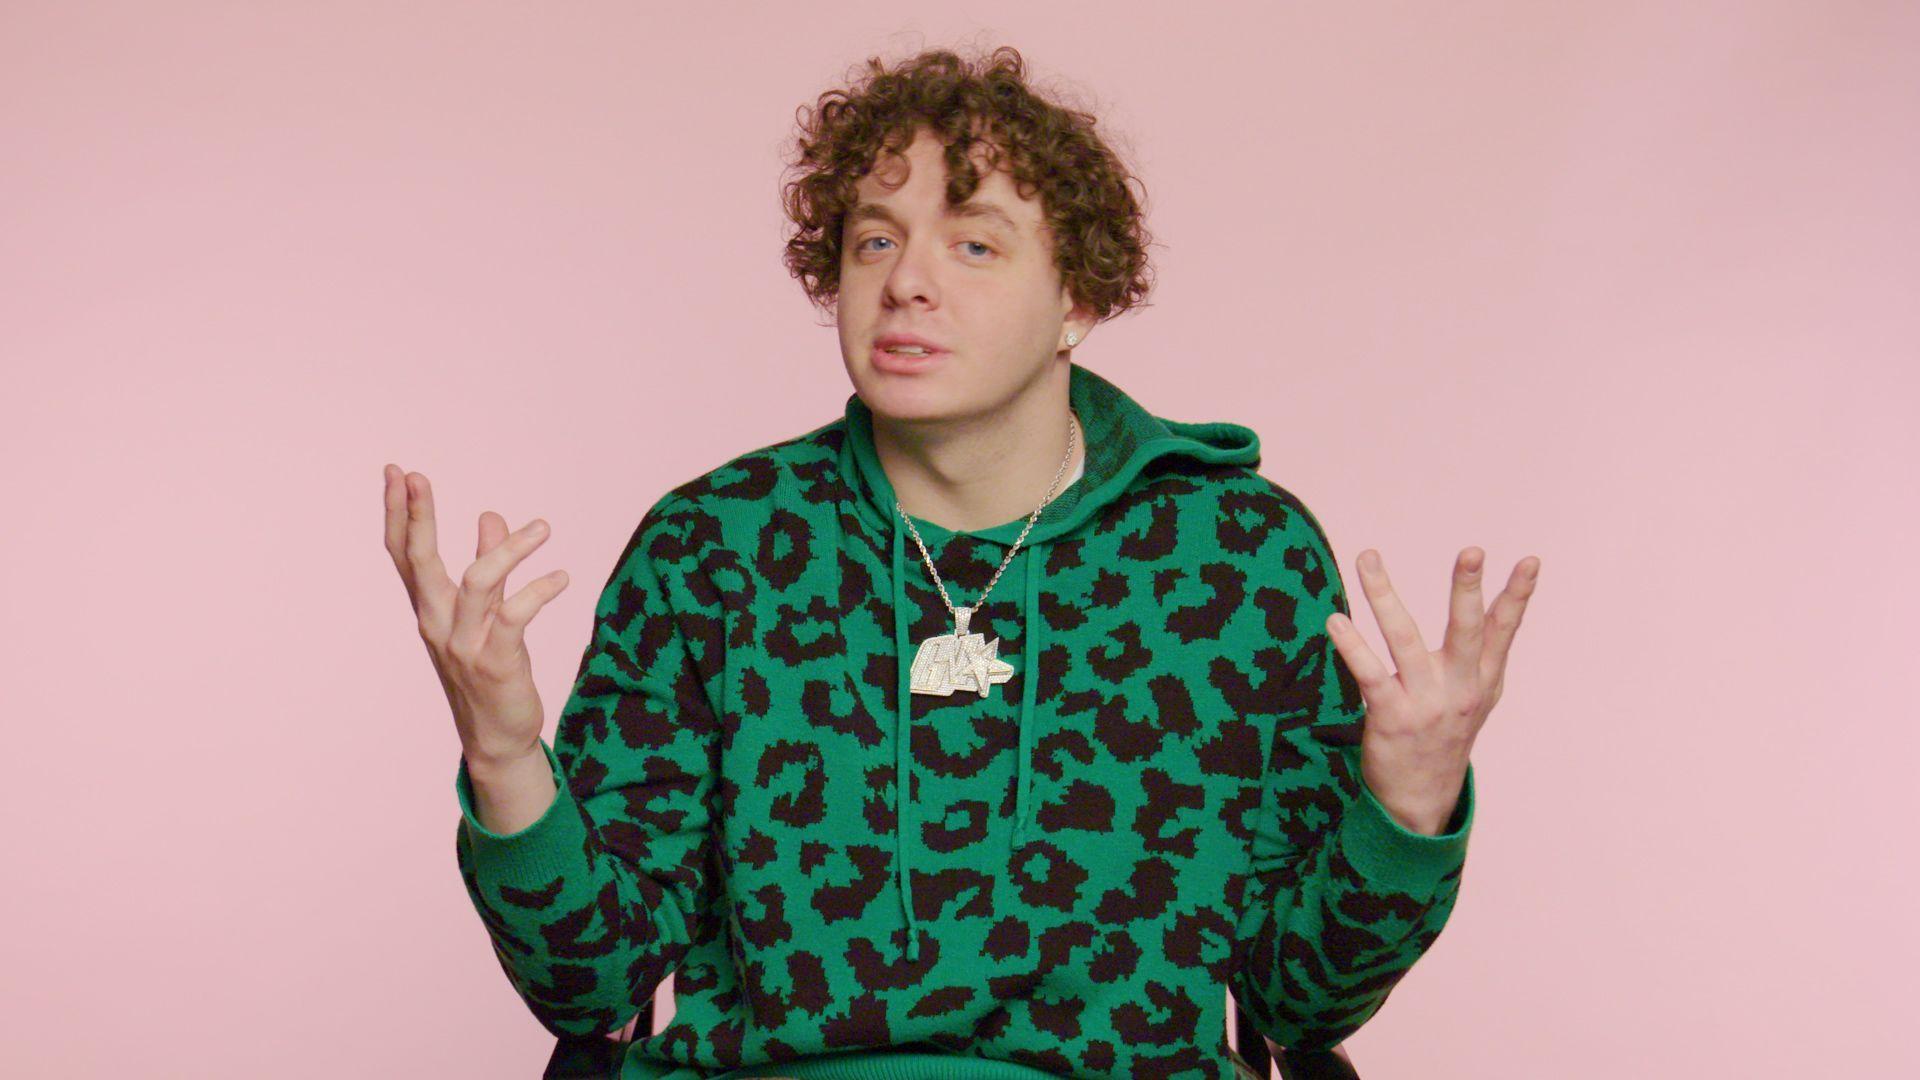 Jack Harlow wants to be legendary His new album proves hes still finding  his voice  Georgia Public Broadcasting